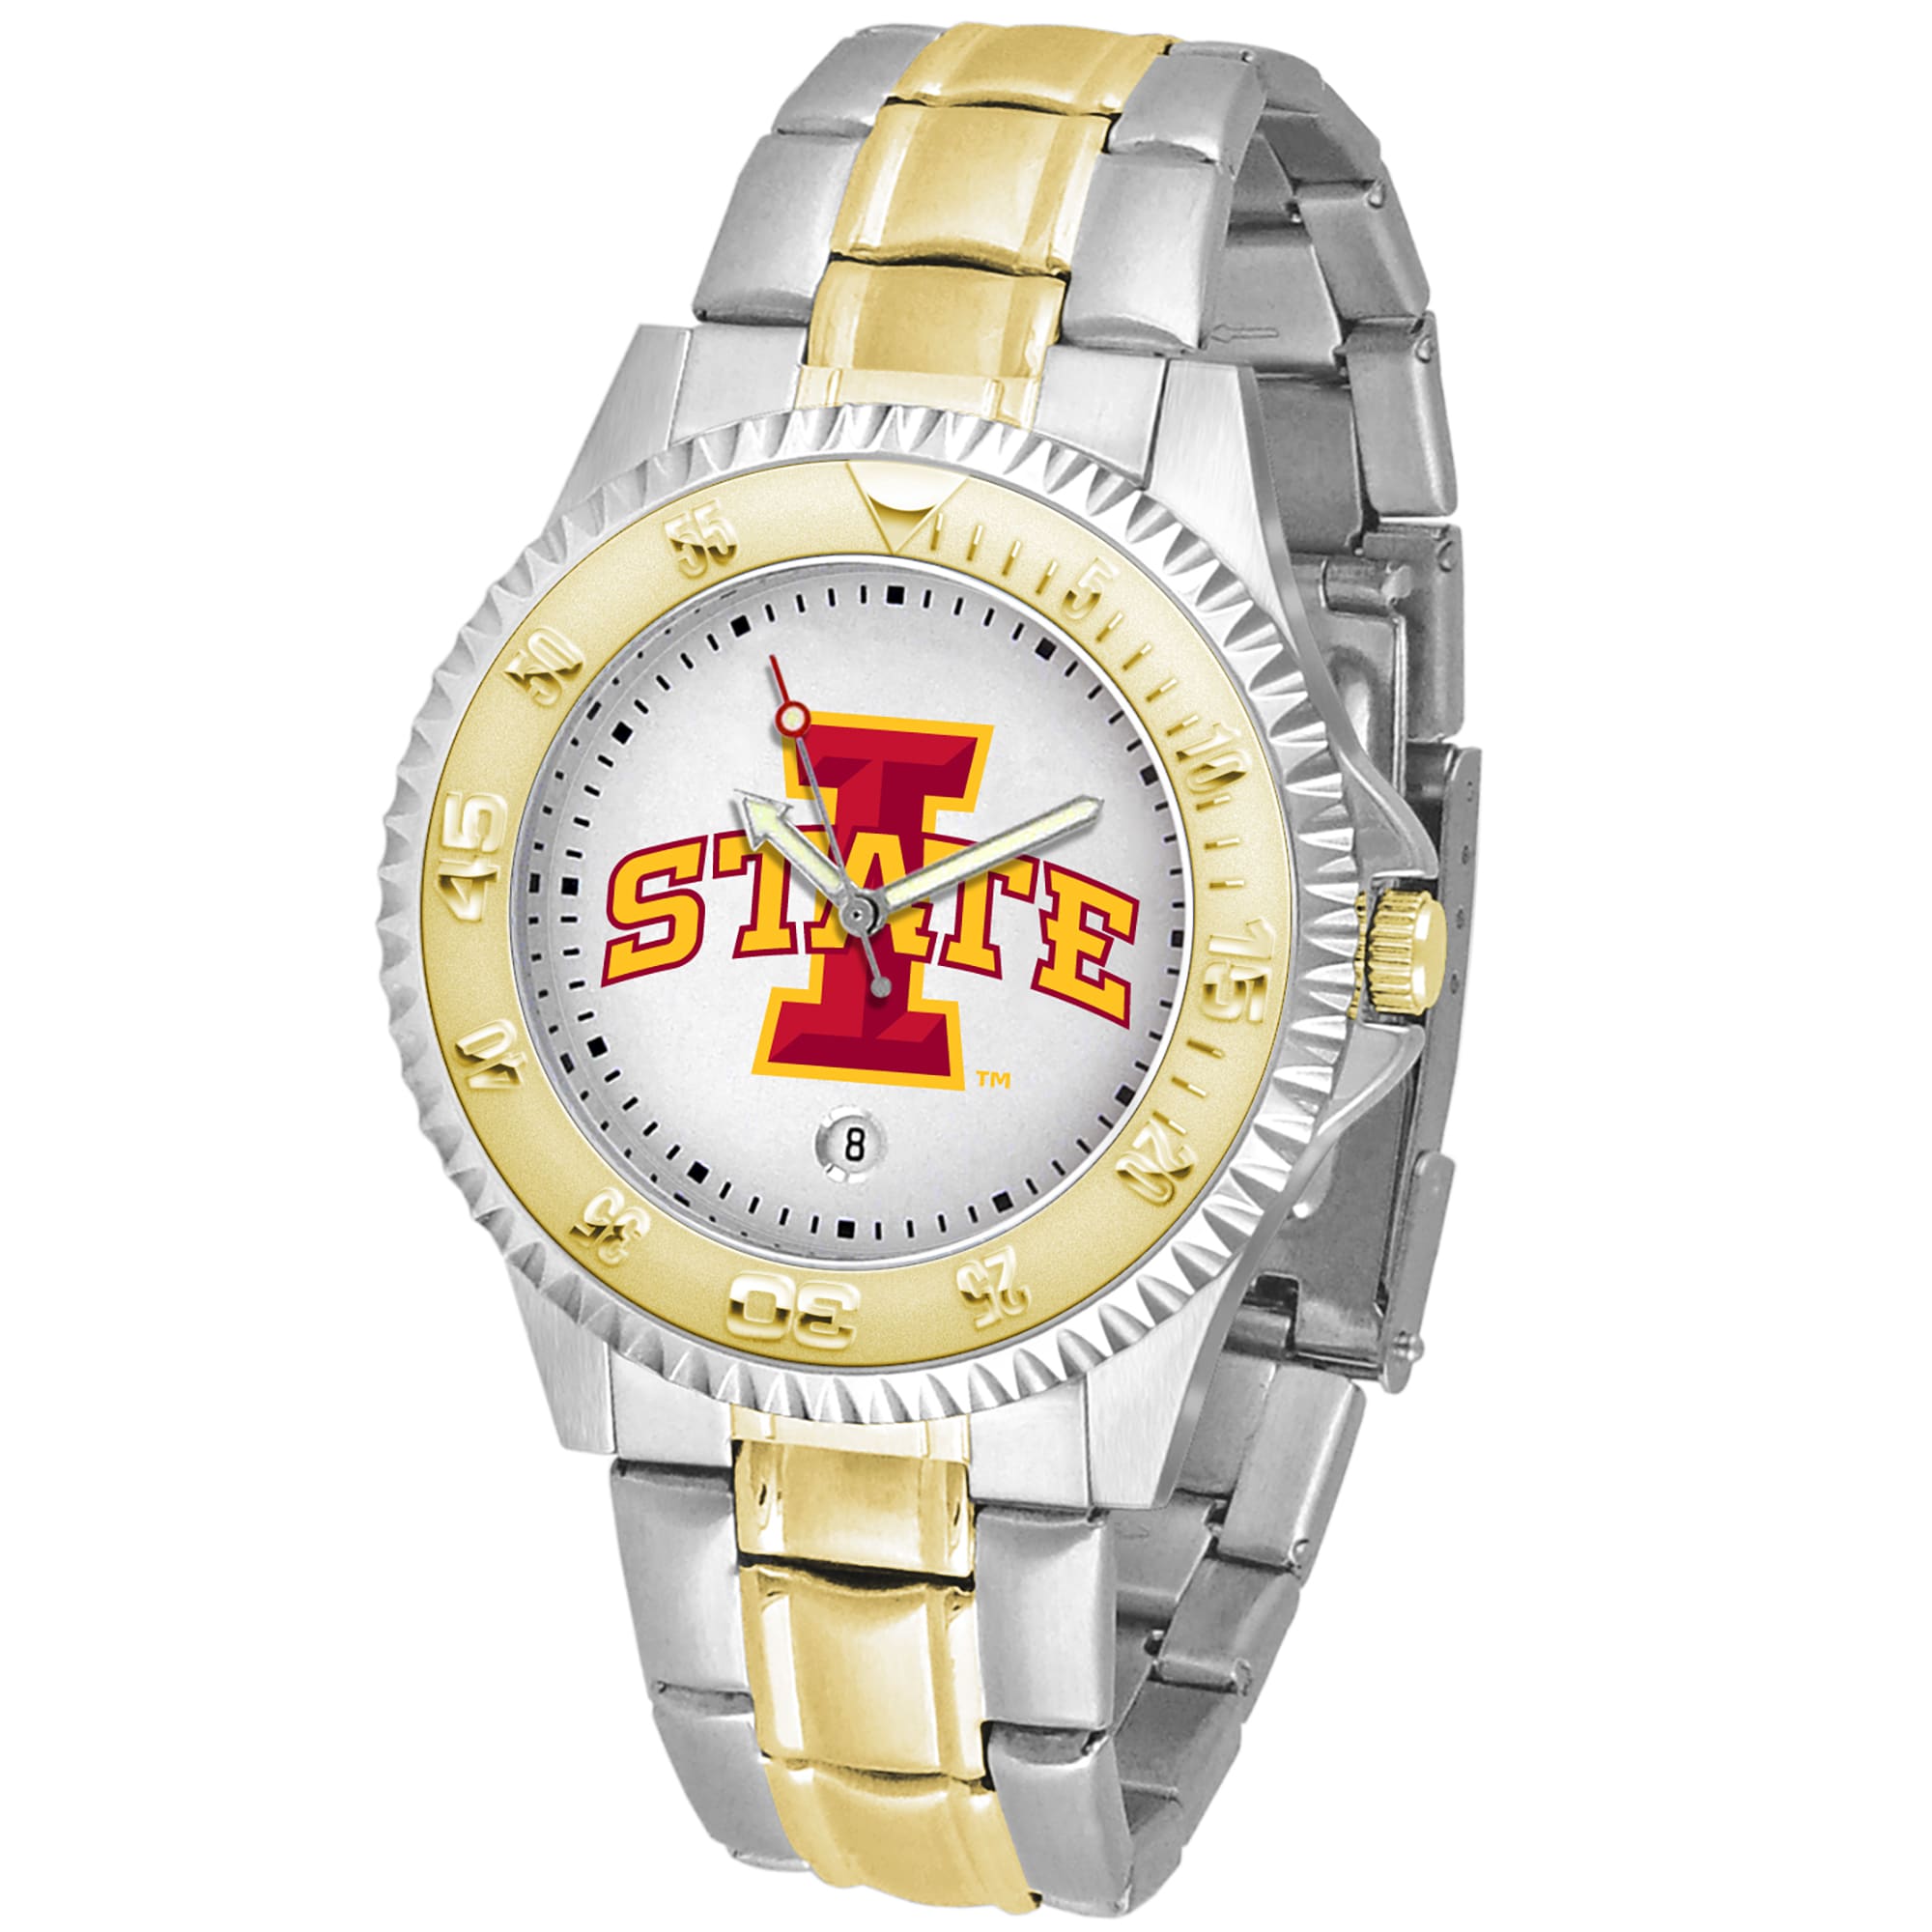 White Iowa State Cyclones Competitor Two-Tone Watch - image 1 of 2